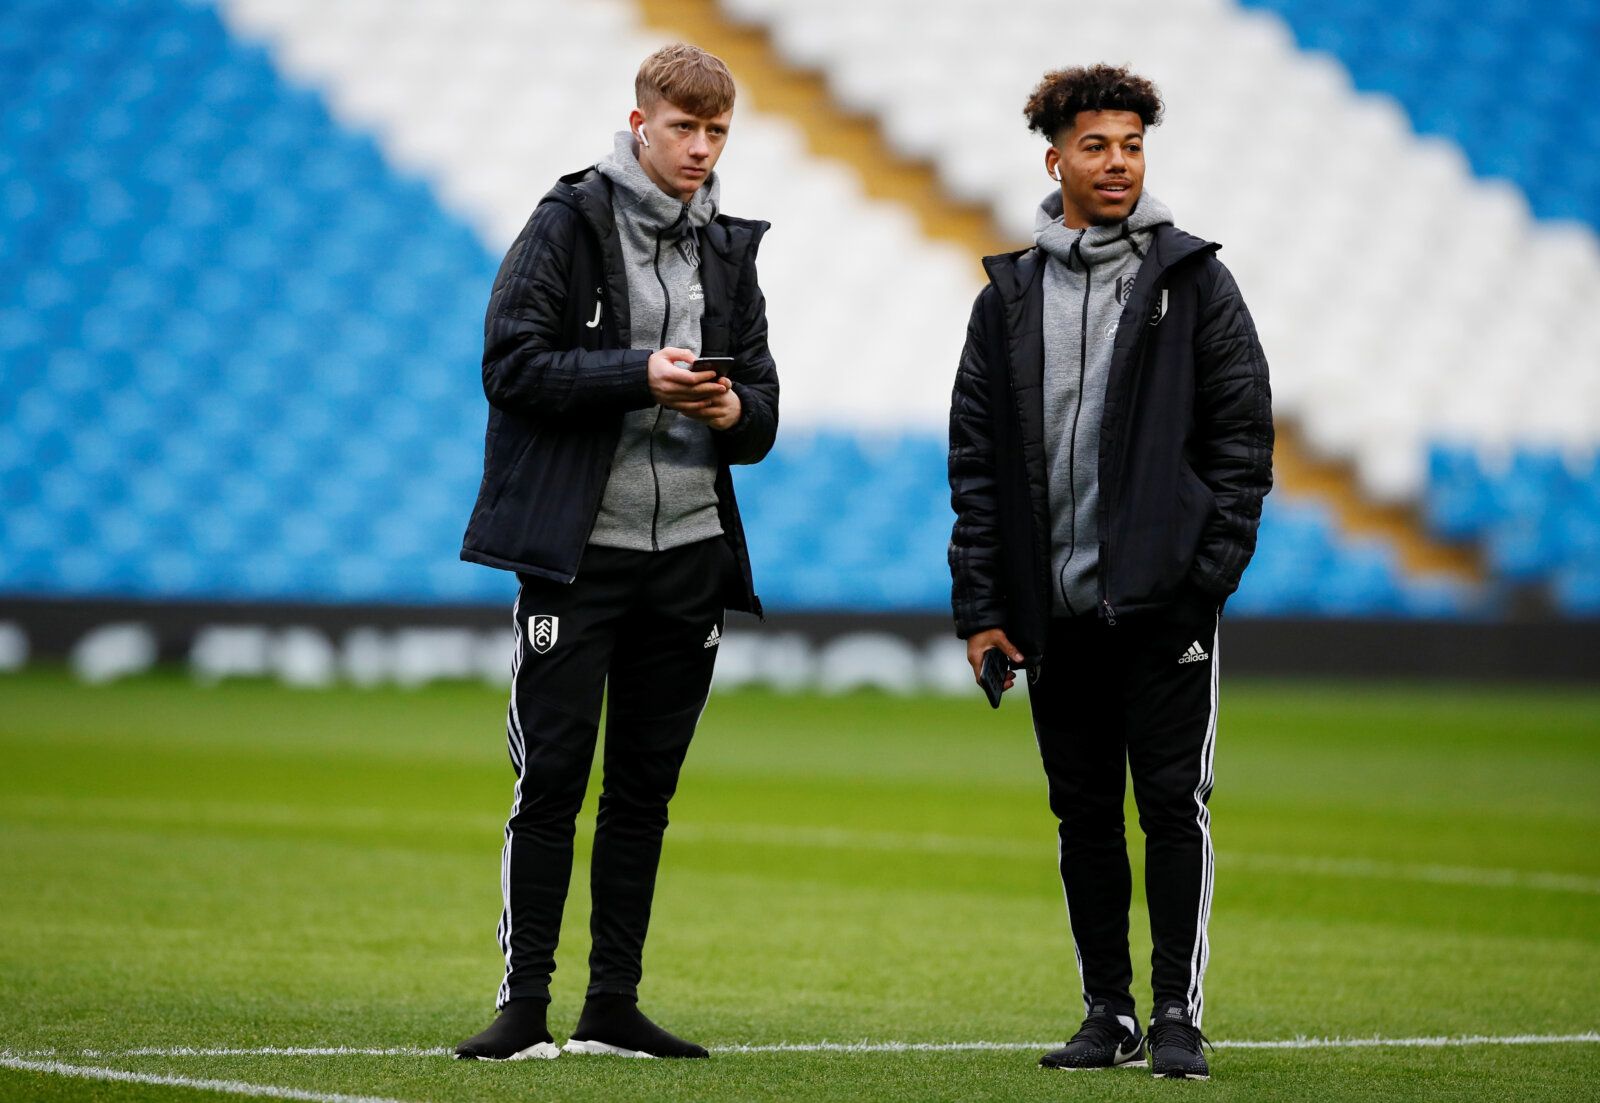 Soccer Football -  FA Cup Fourth Round - Manchester City v Fulham - Etihad Stadium, Manchester, Britain - January 26, 2020  Fulham's Jay Stansfield and Sylvester Jasper on the pitch before the match  Action Images via Reuters/Jason Cairnduff